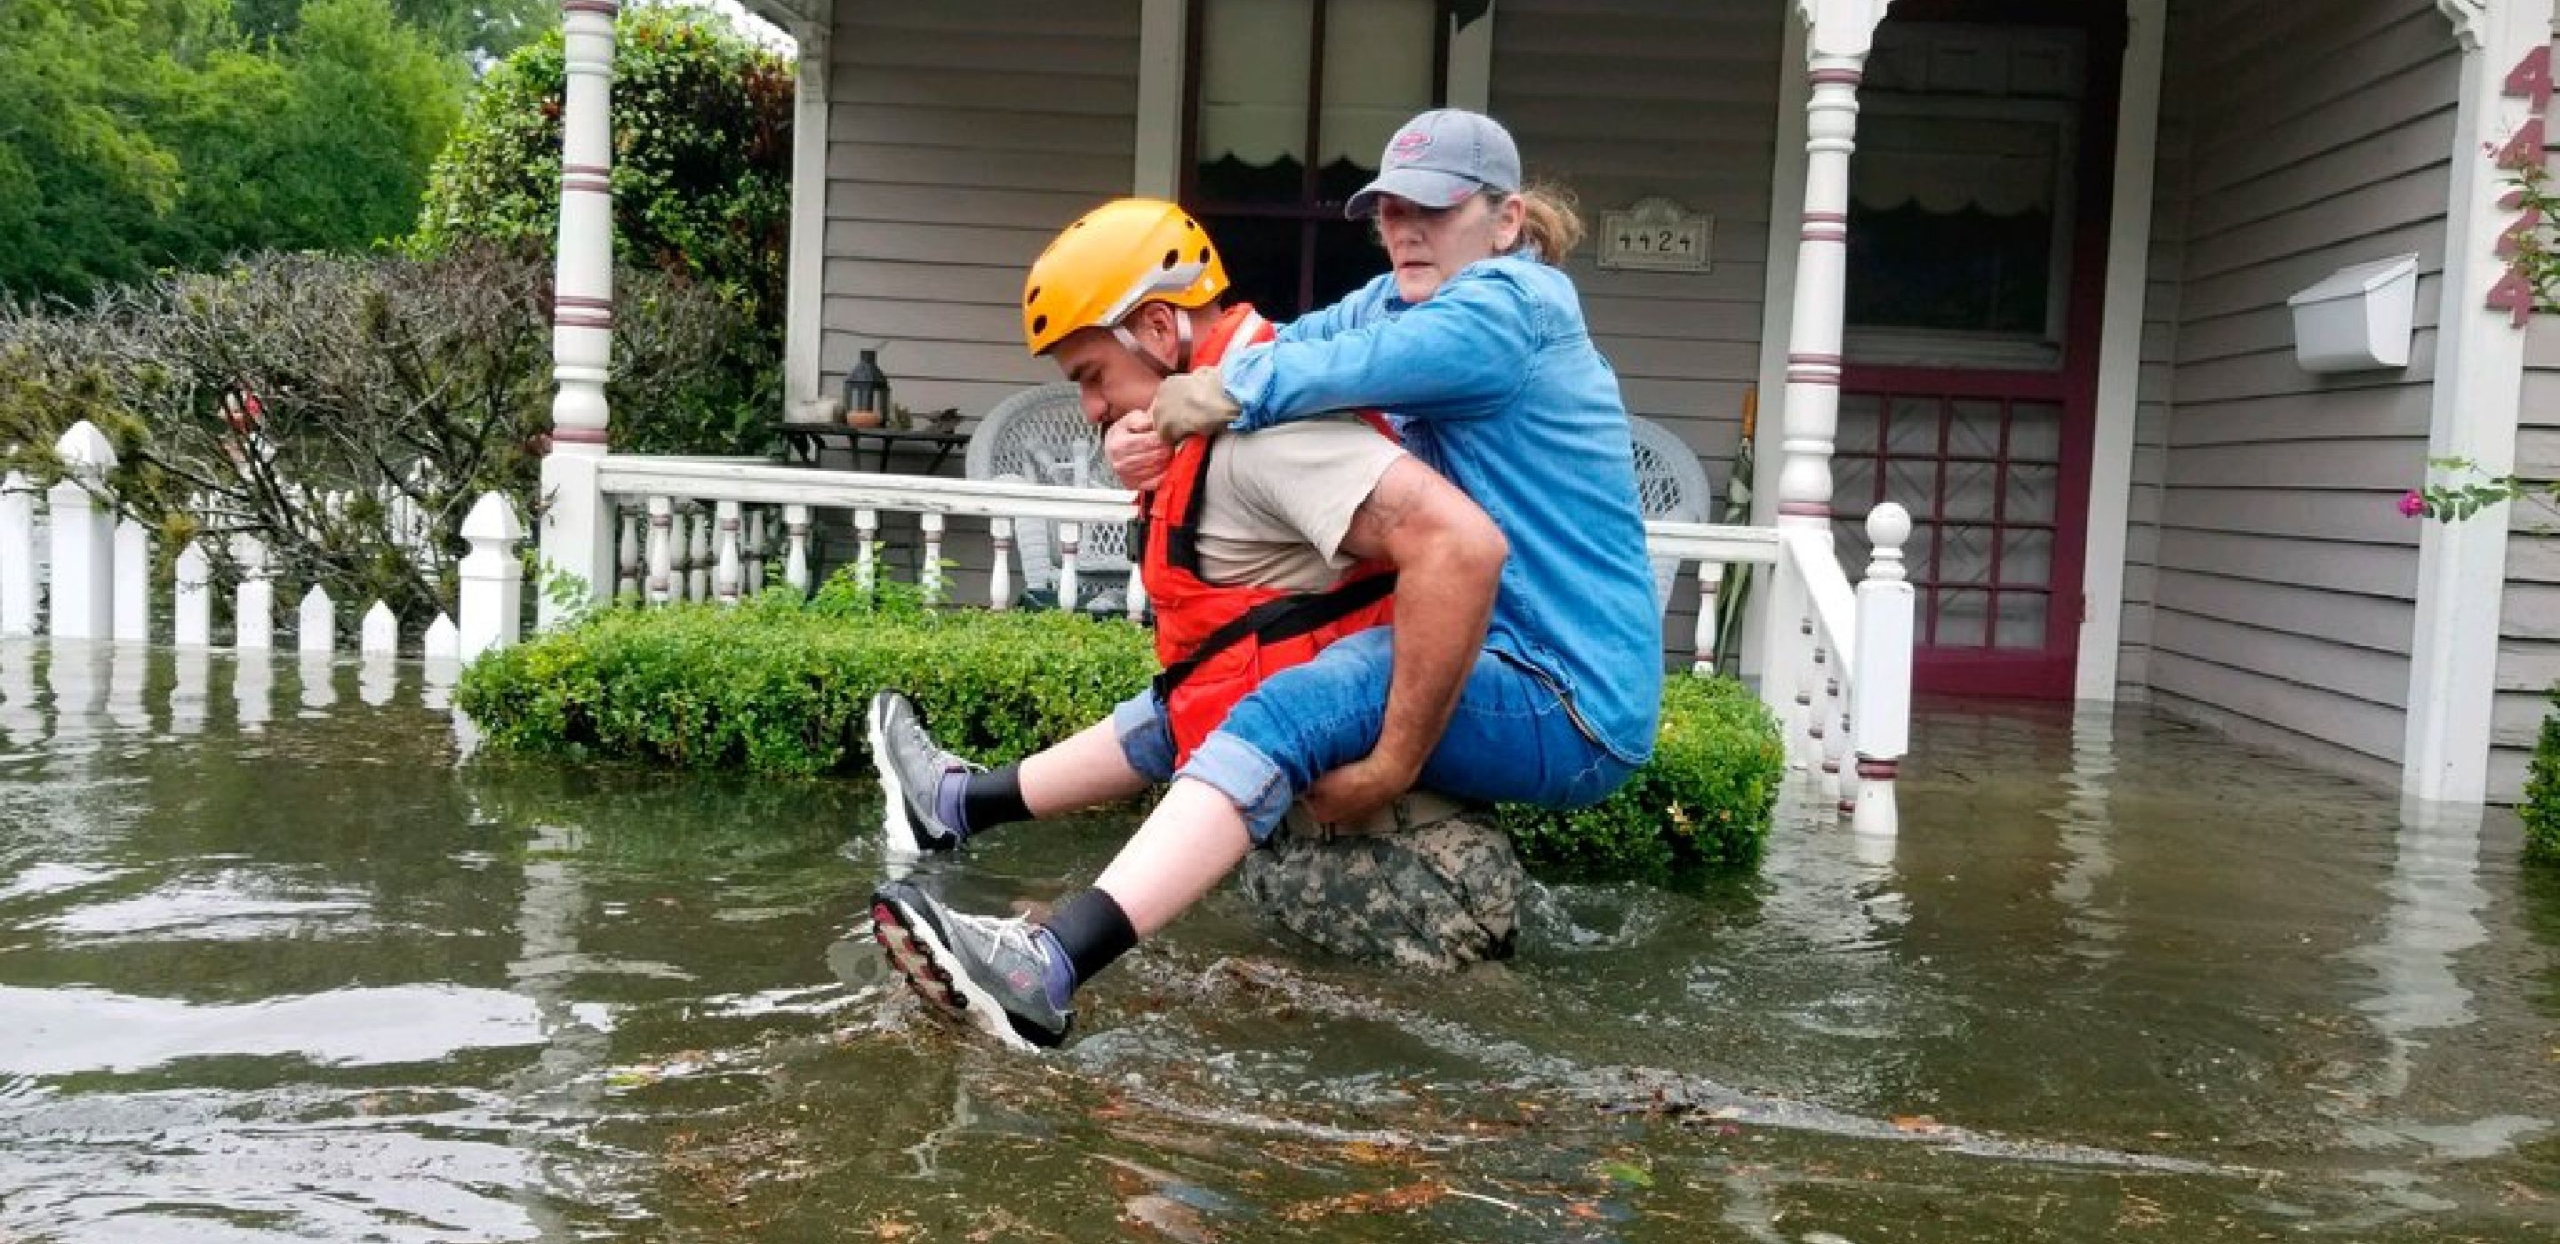 A man carries a woman on his back through flood waters in Texas